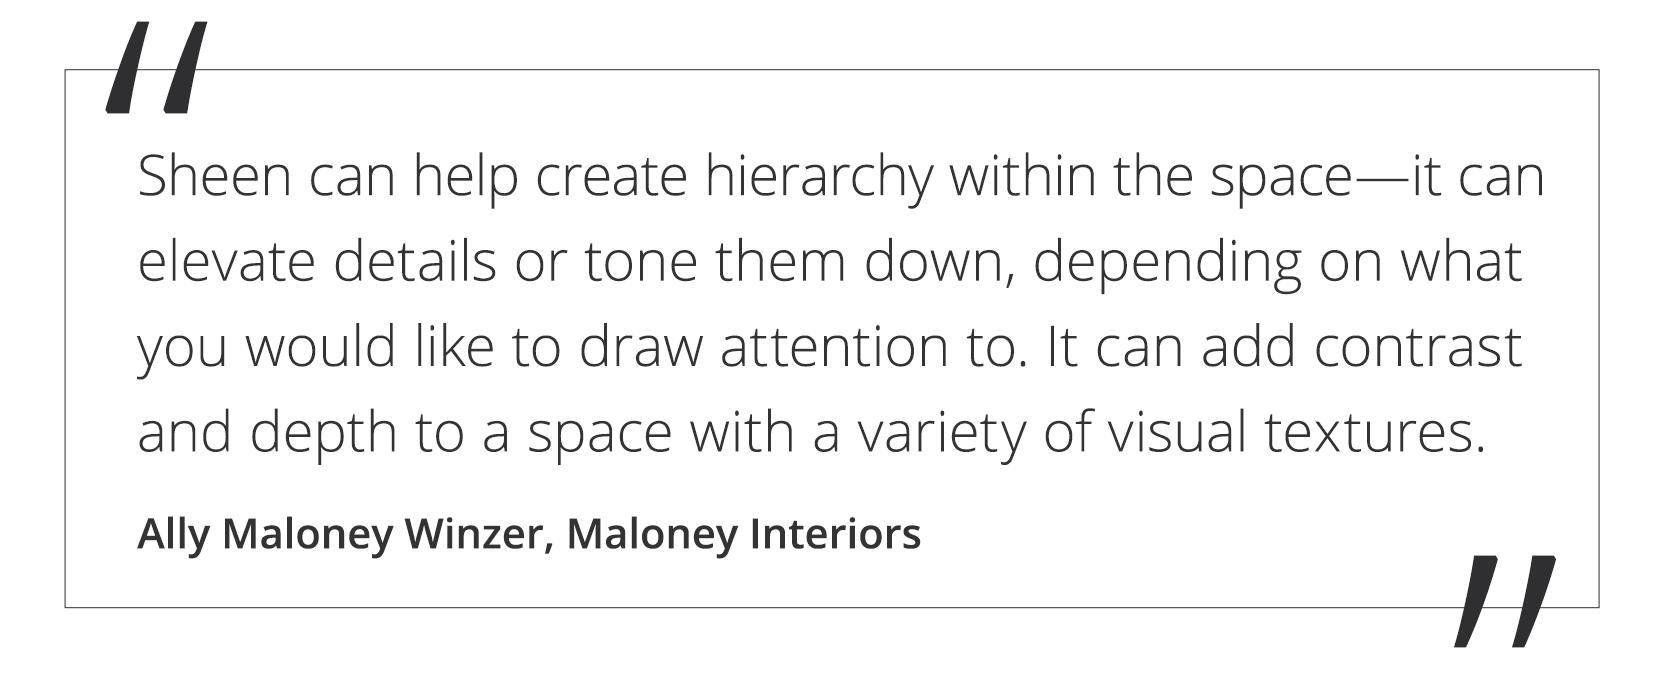 A quote by Ally Maloney Winzer from Maloney Interiors stating, sheen can help create hierarchy within the space—it can elevate details or tone them down, depending on what you would like to draw attention to. It can add contrast and depth to a space with a variety of visual textures.